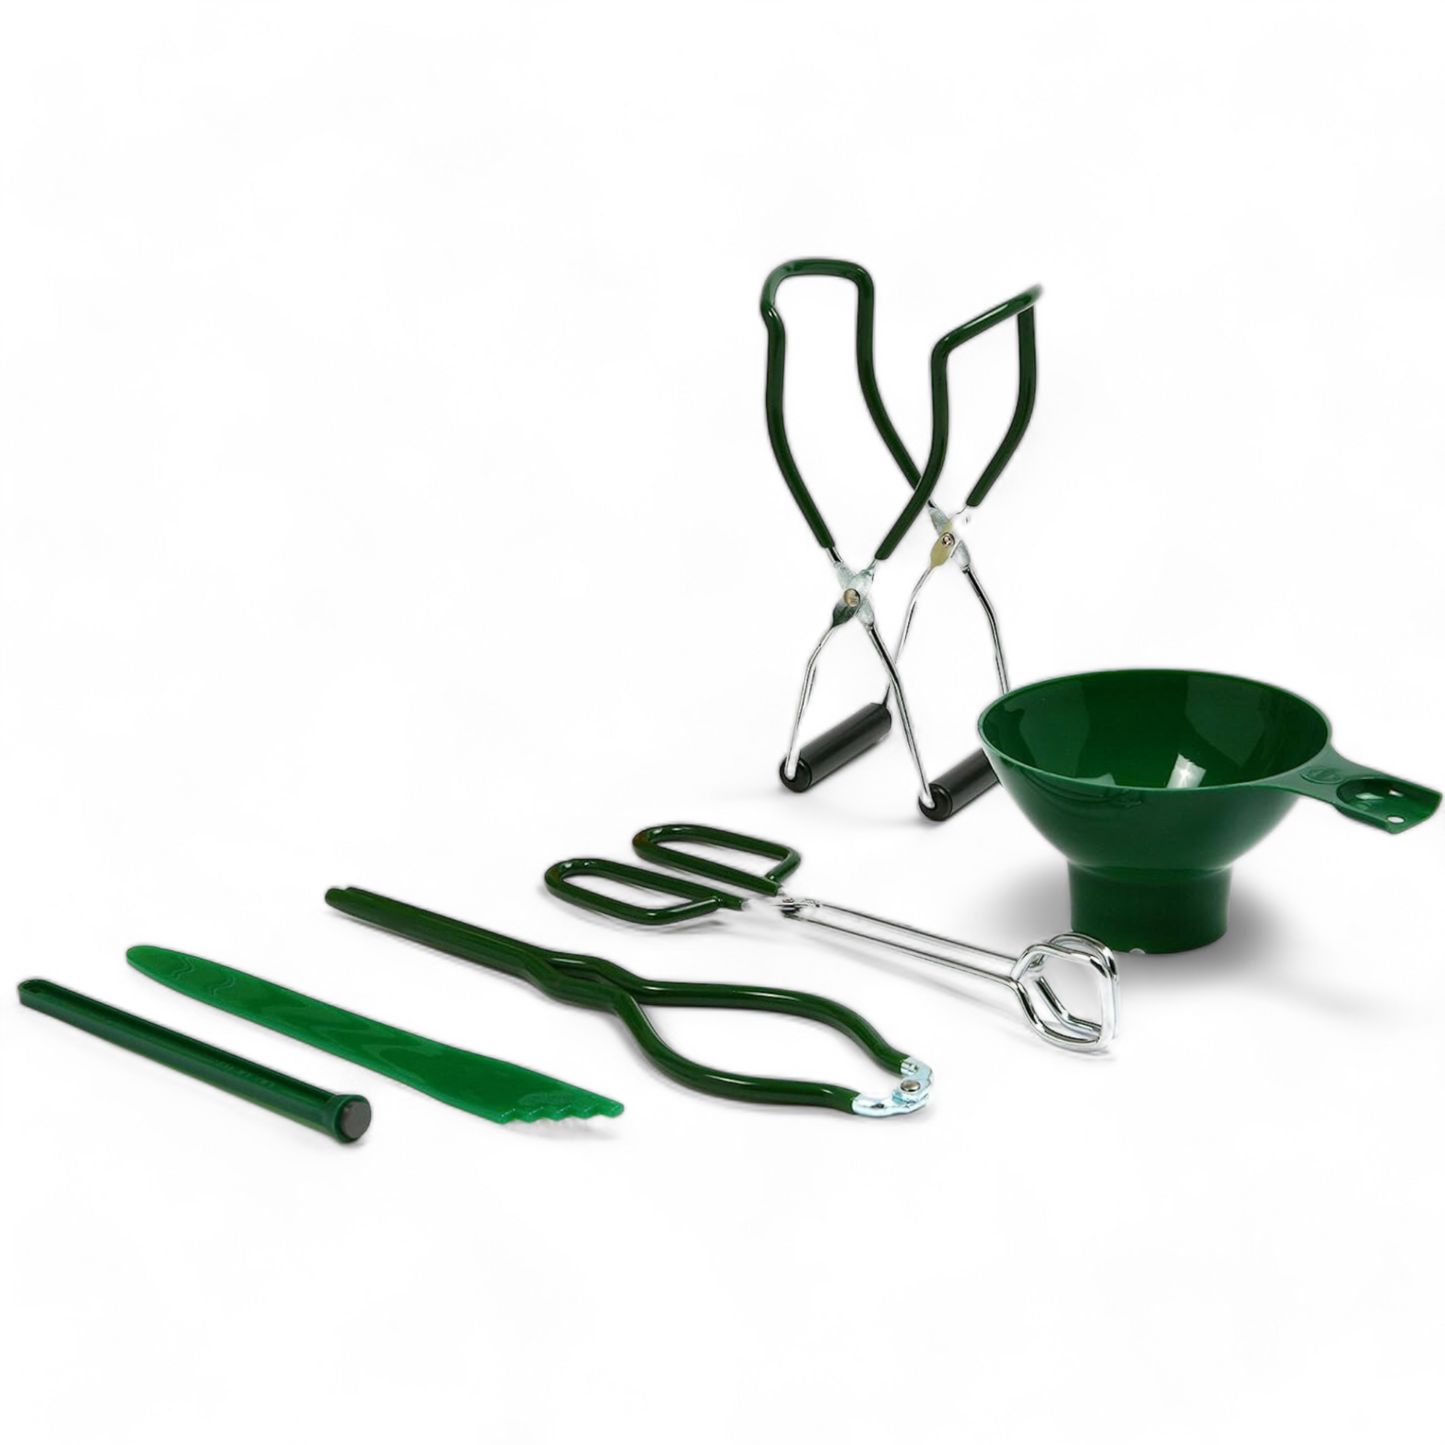 Complete 6-piece set for canning with green utensils including a ladle and tongs